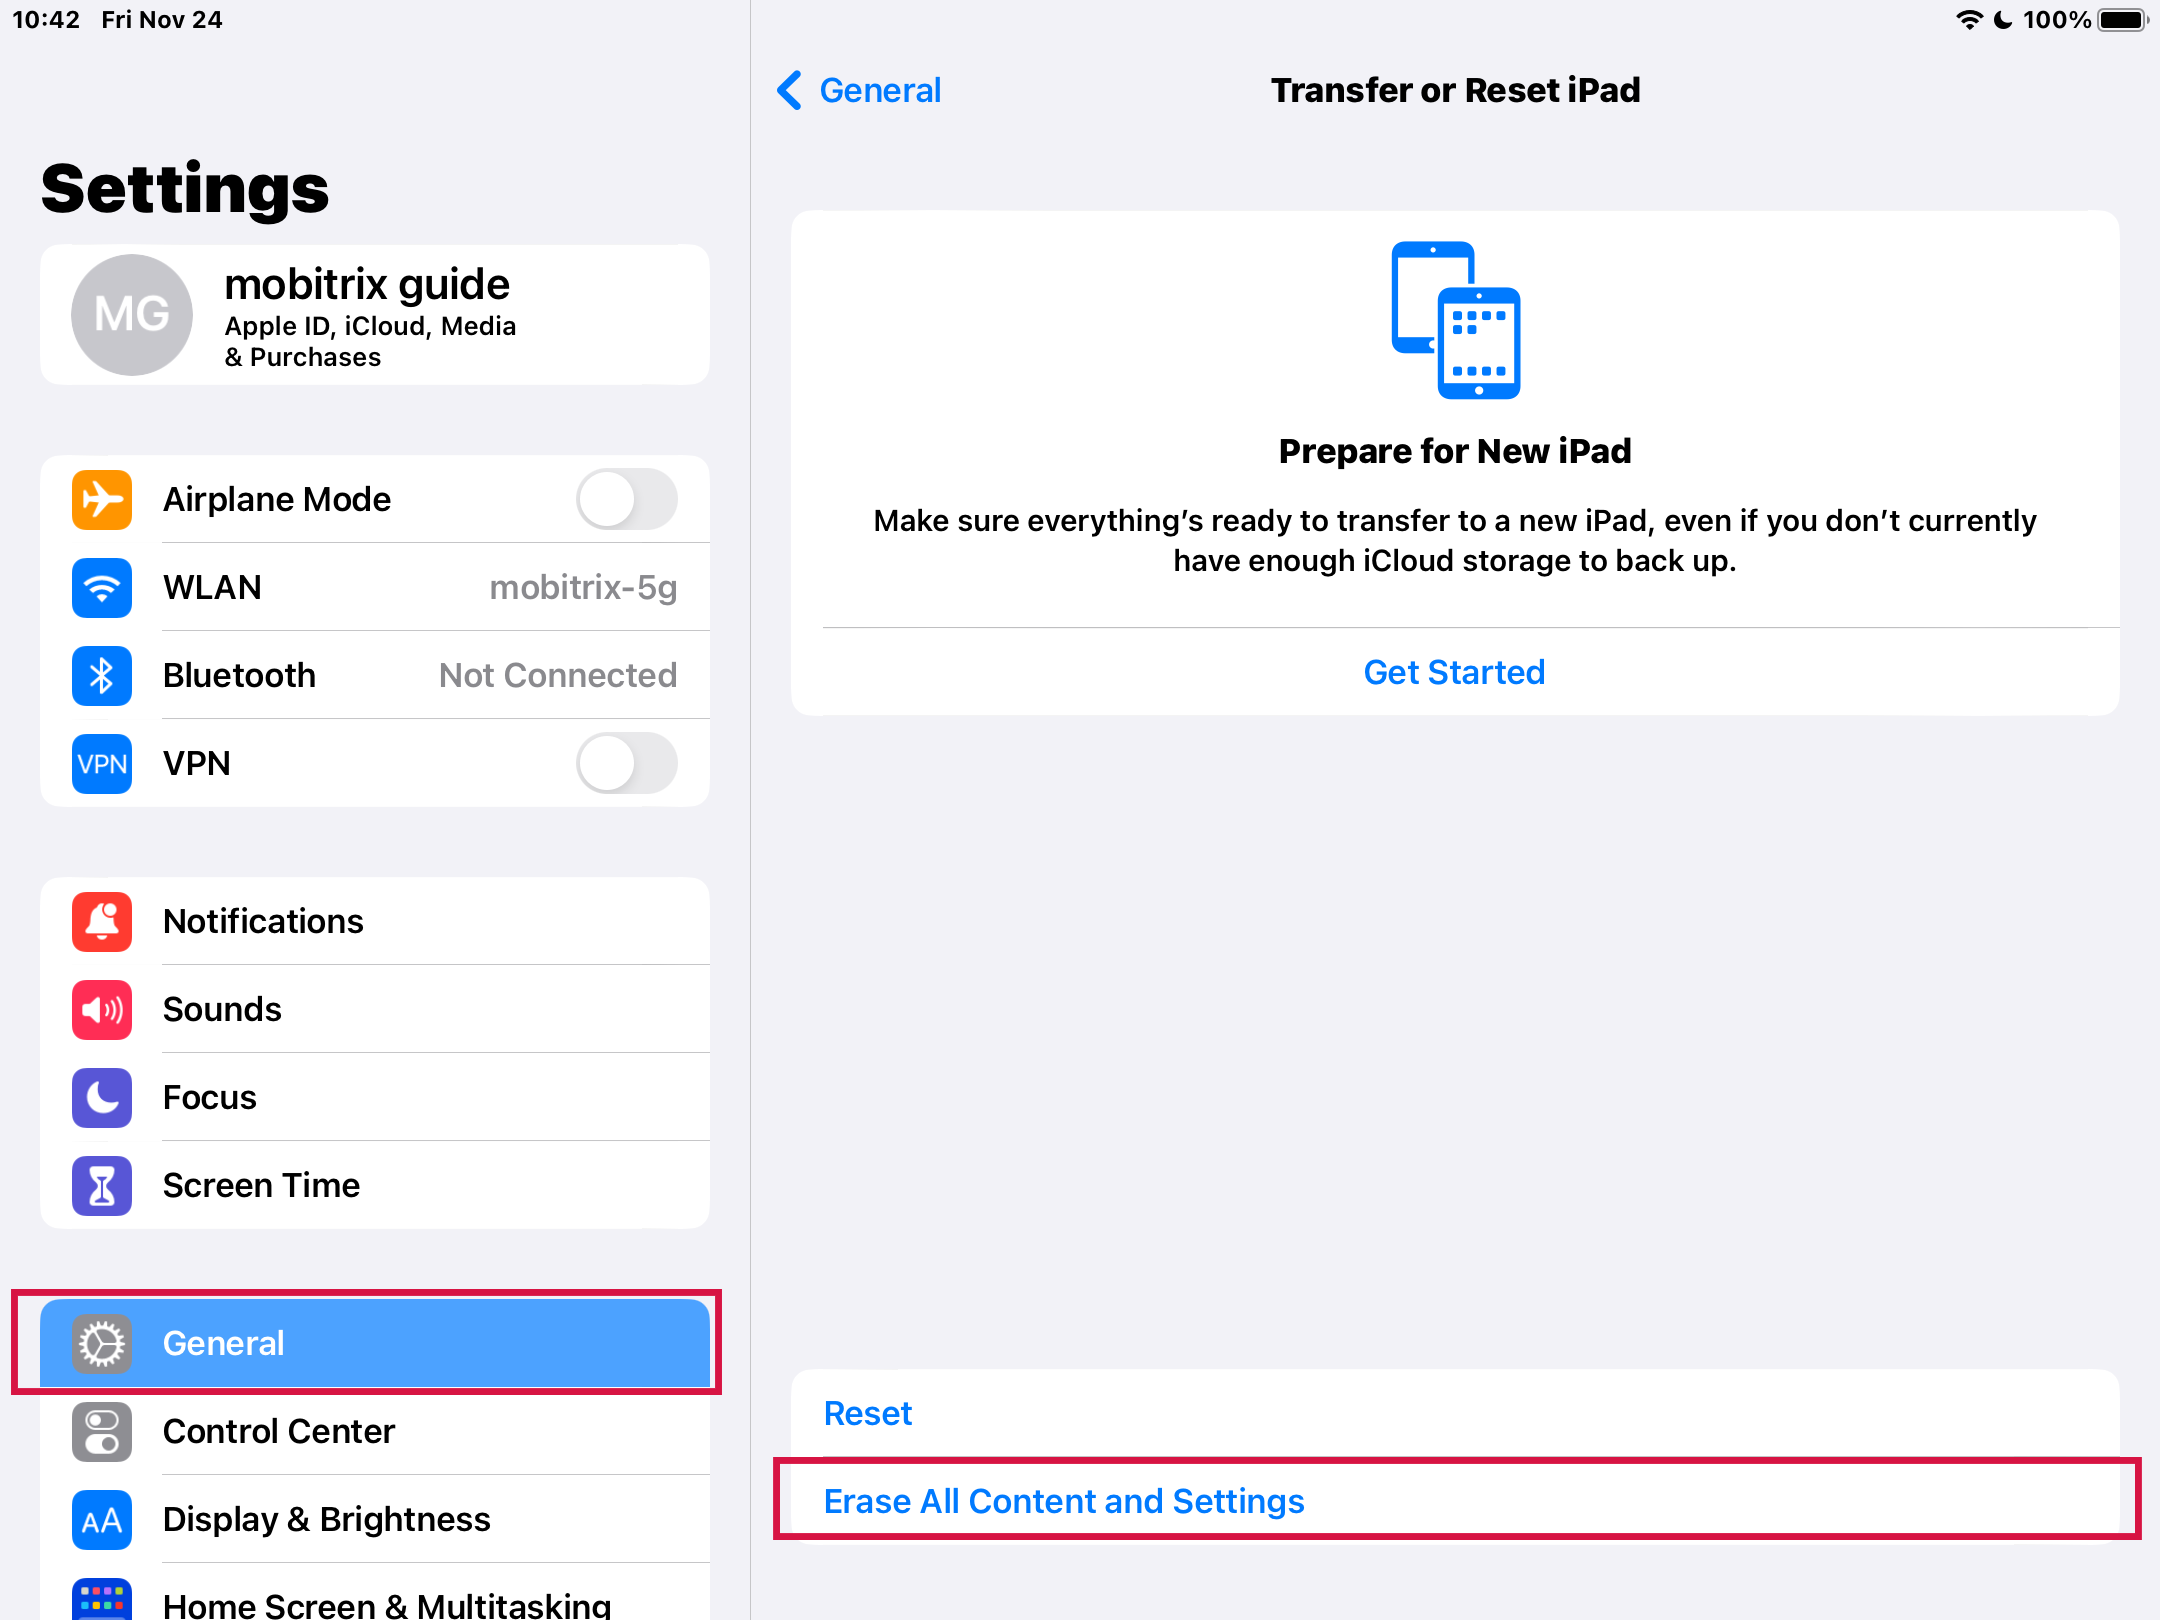 Erase All Content and Settings on iPad